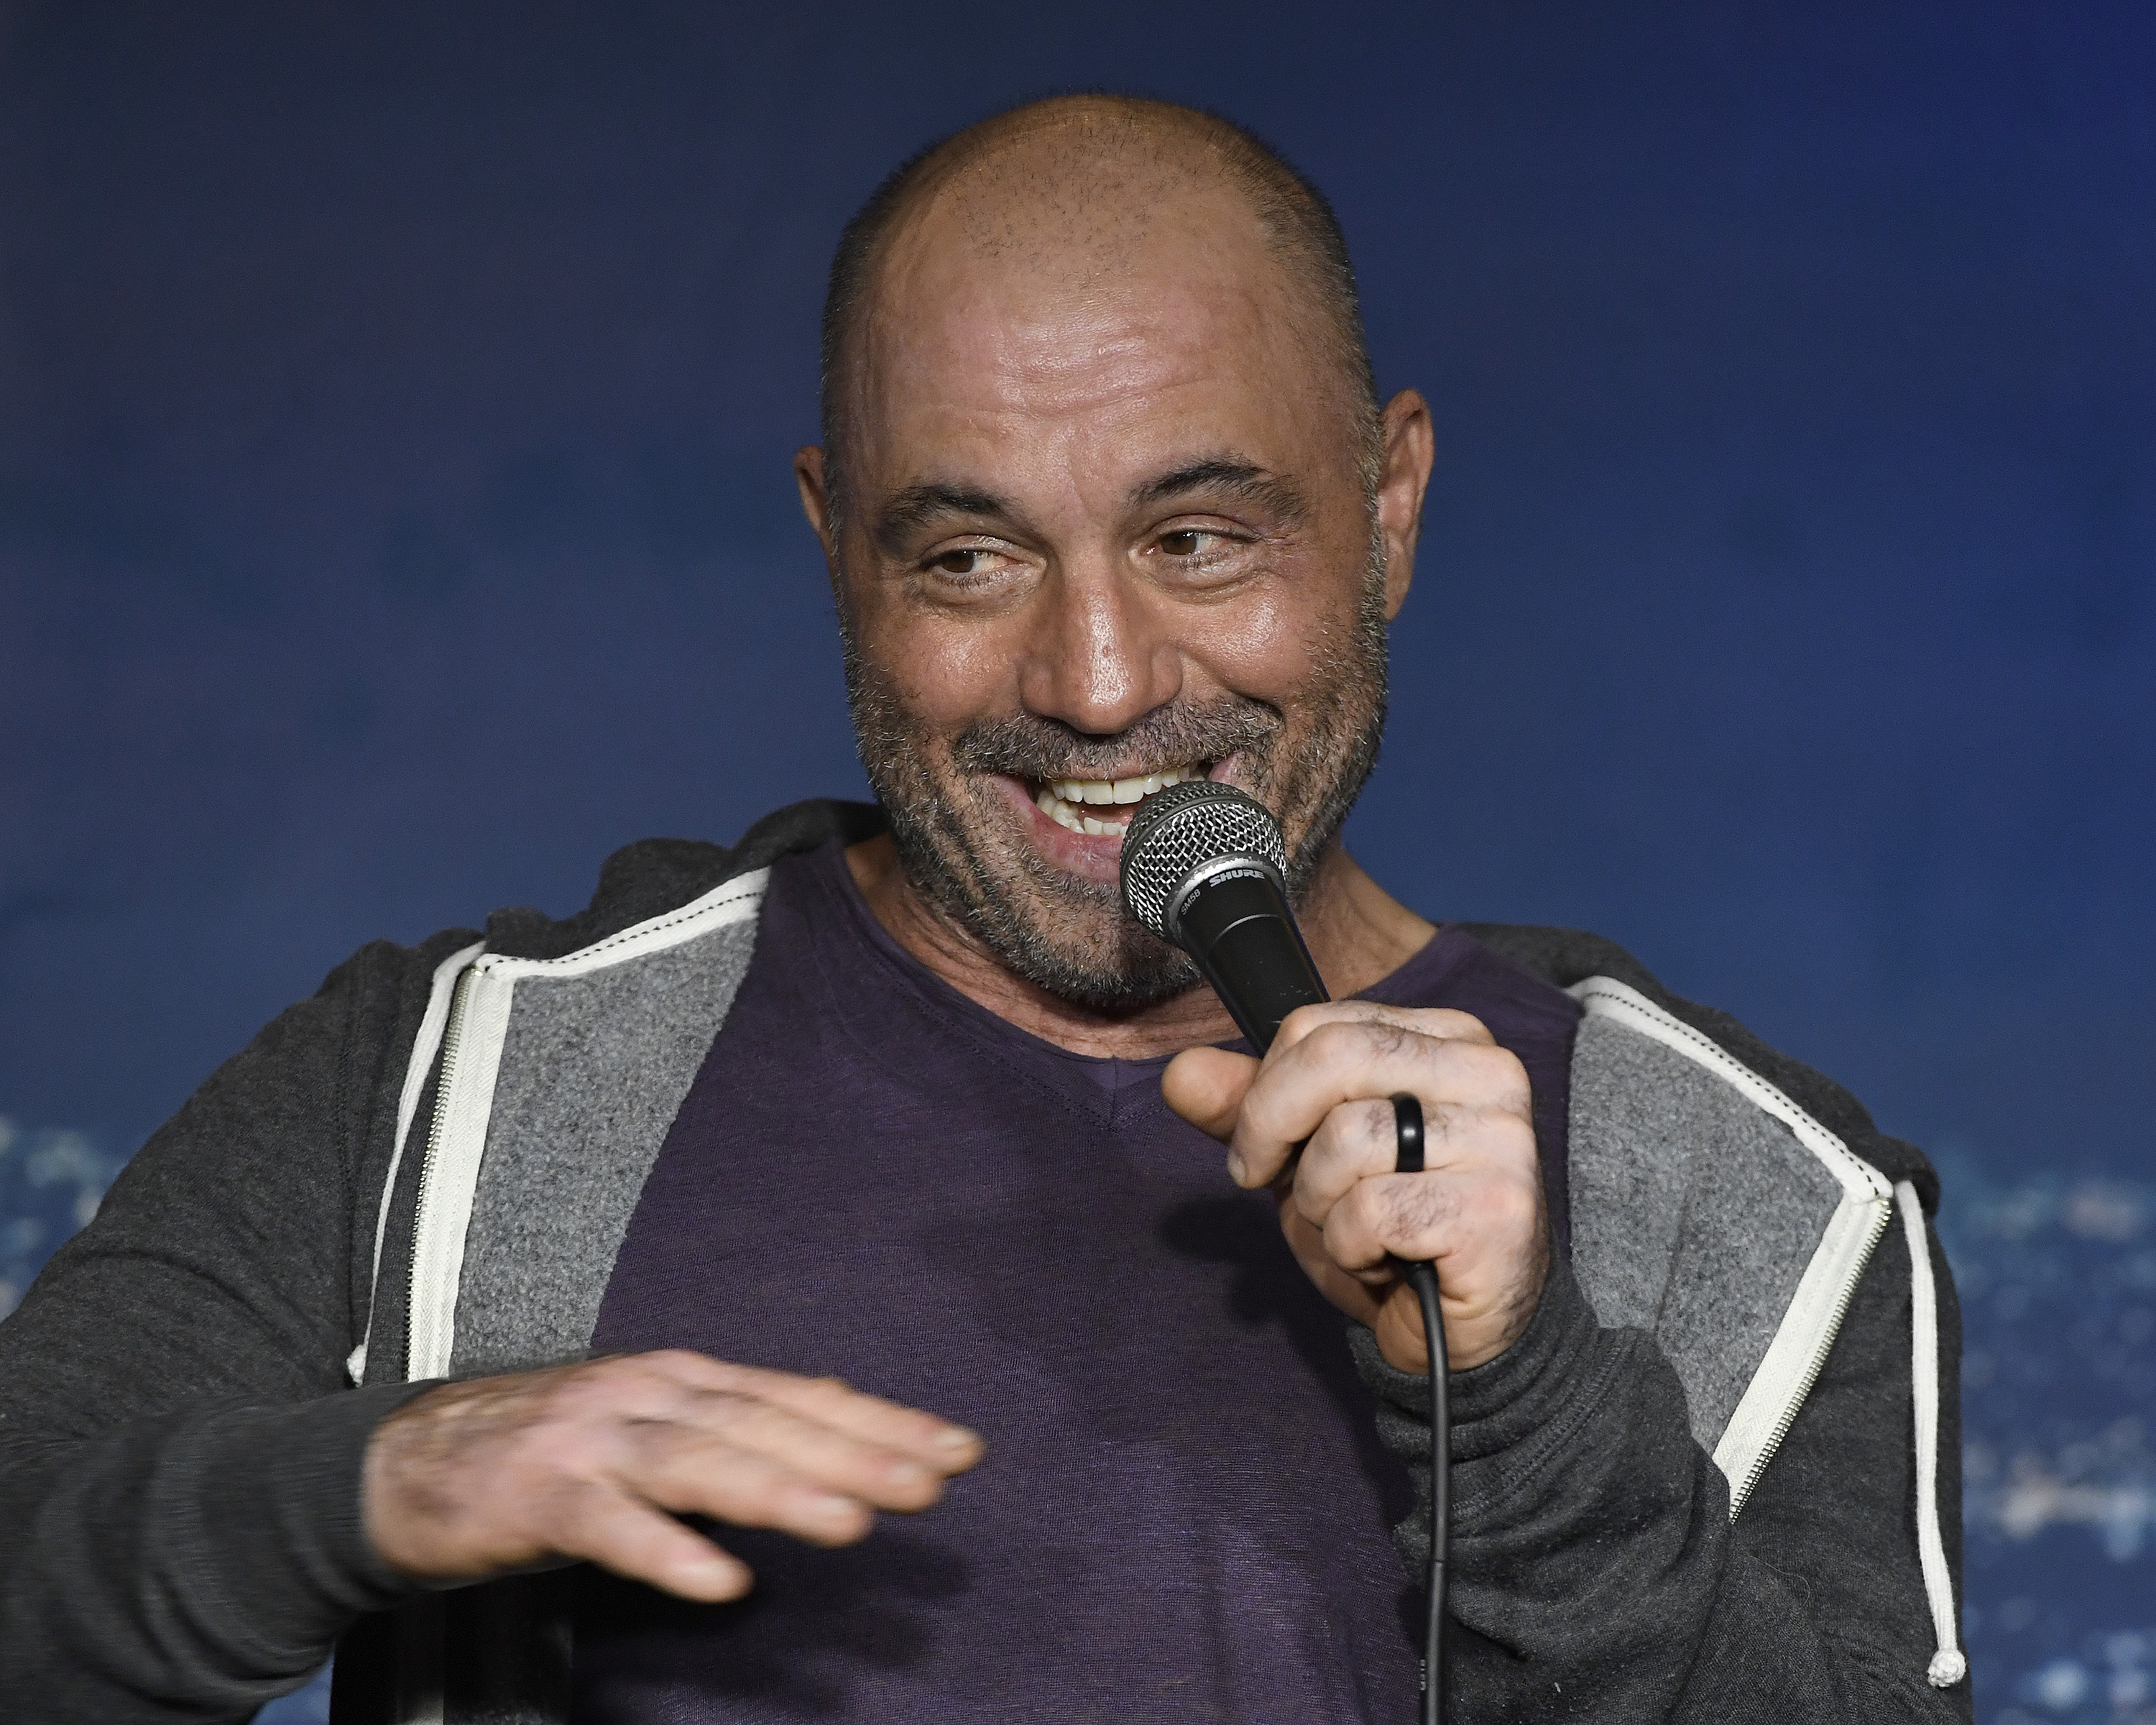 Joe Rogan talks to the crowd during a stand up comedy show